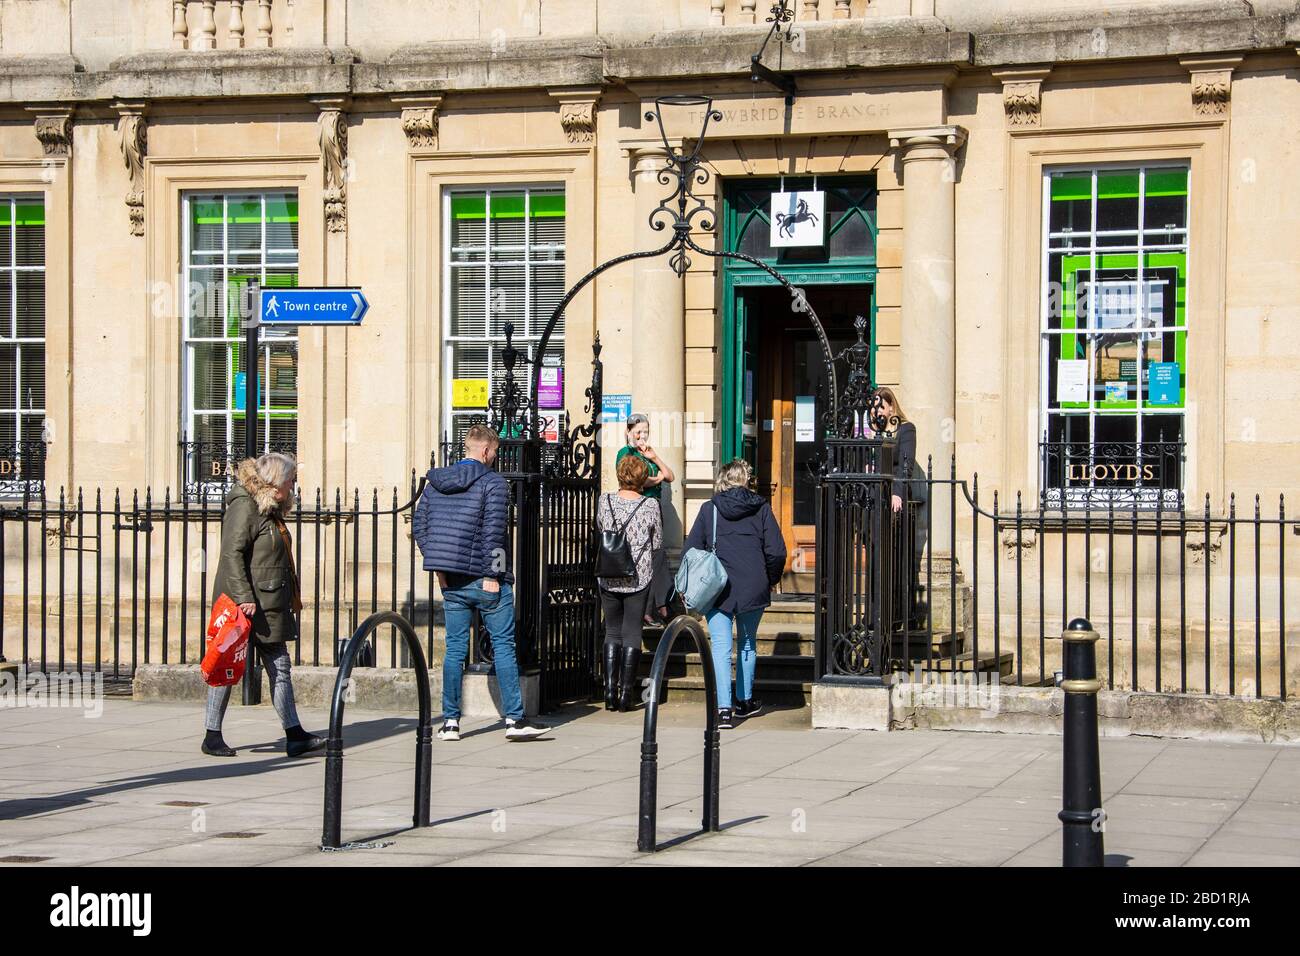 Customers queuing outside Lloyds Bank in Trowbrige supervised by bank staff during the corona virus lockdown Stock Photo